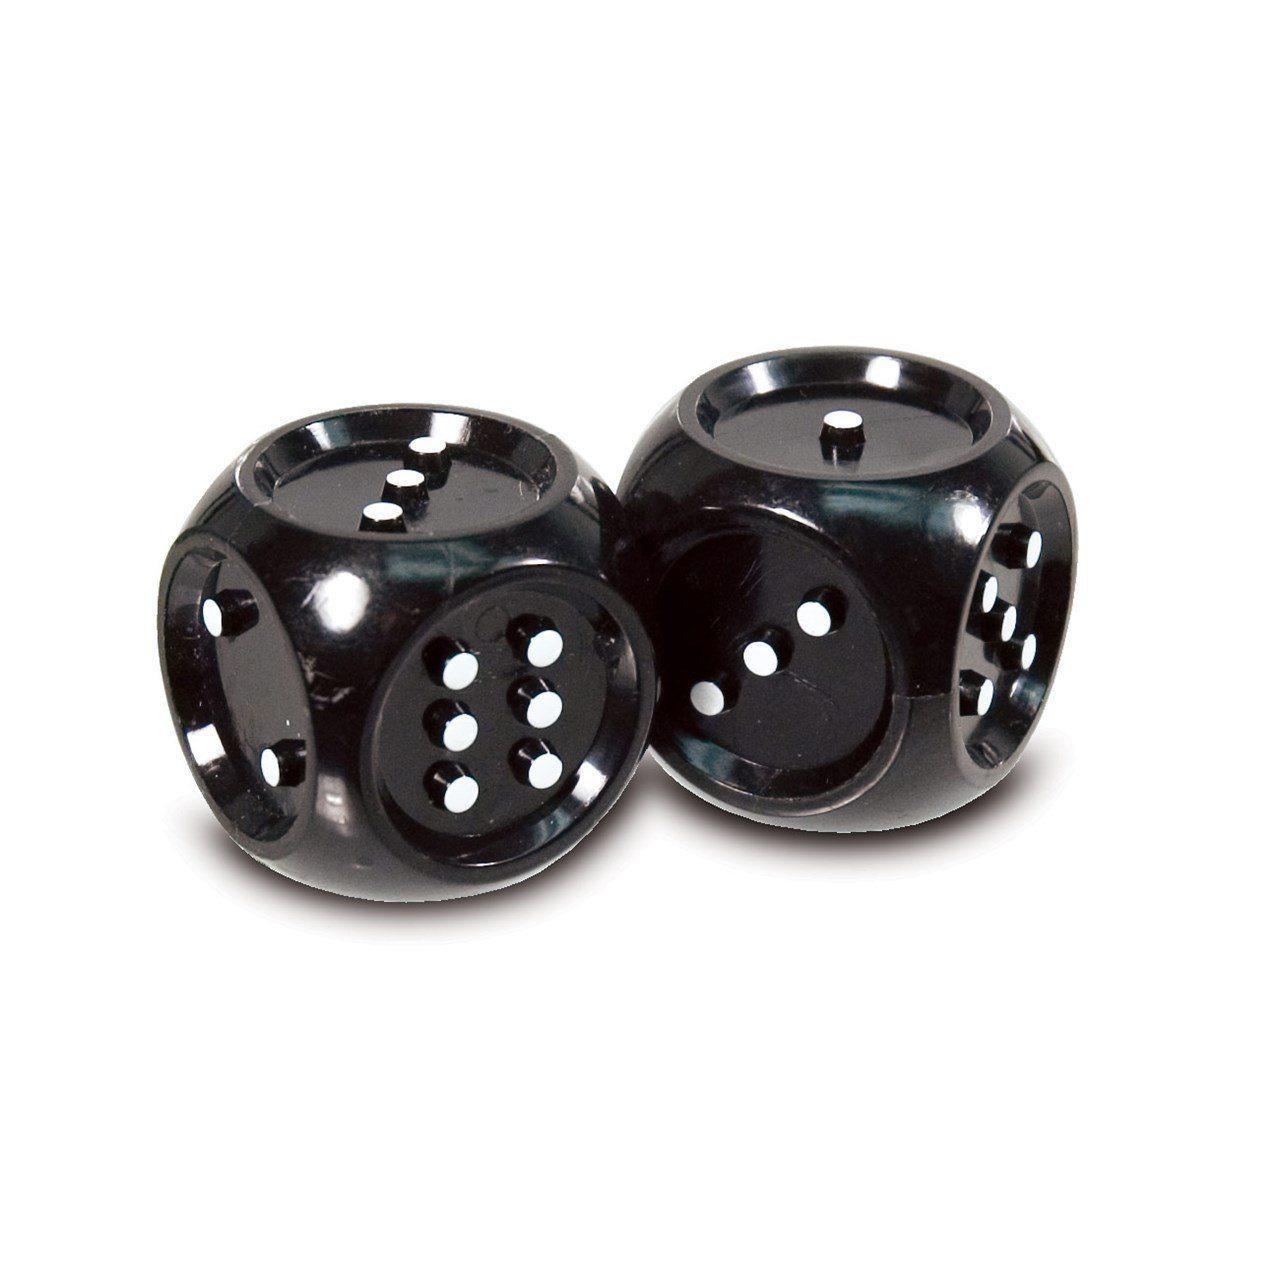 Giant Tactile Dice- Black with White Dots - Set-2 - The Low Vision Store